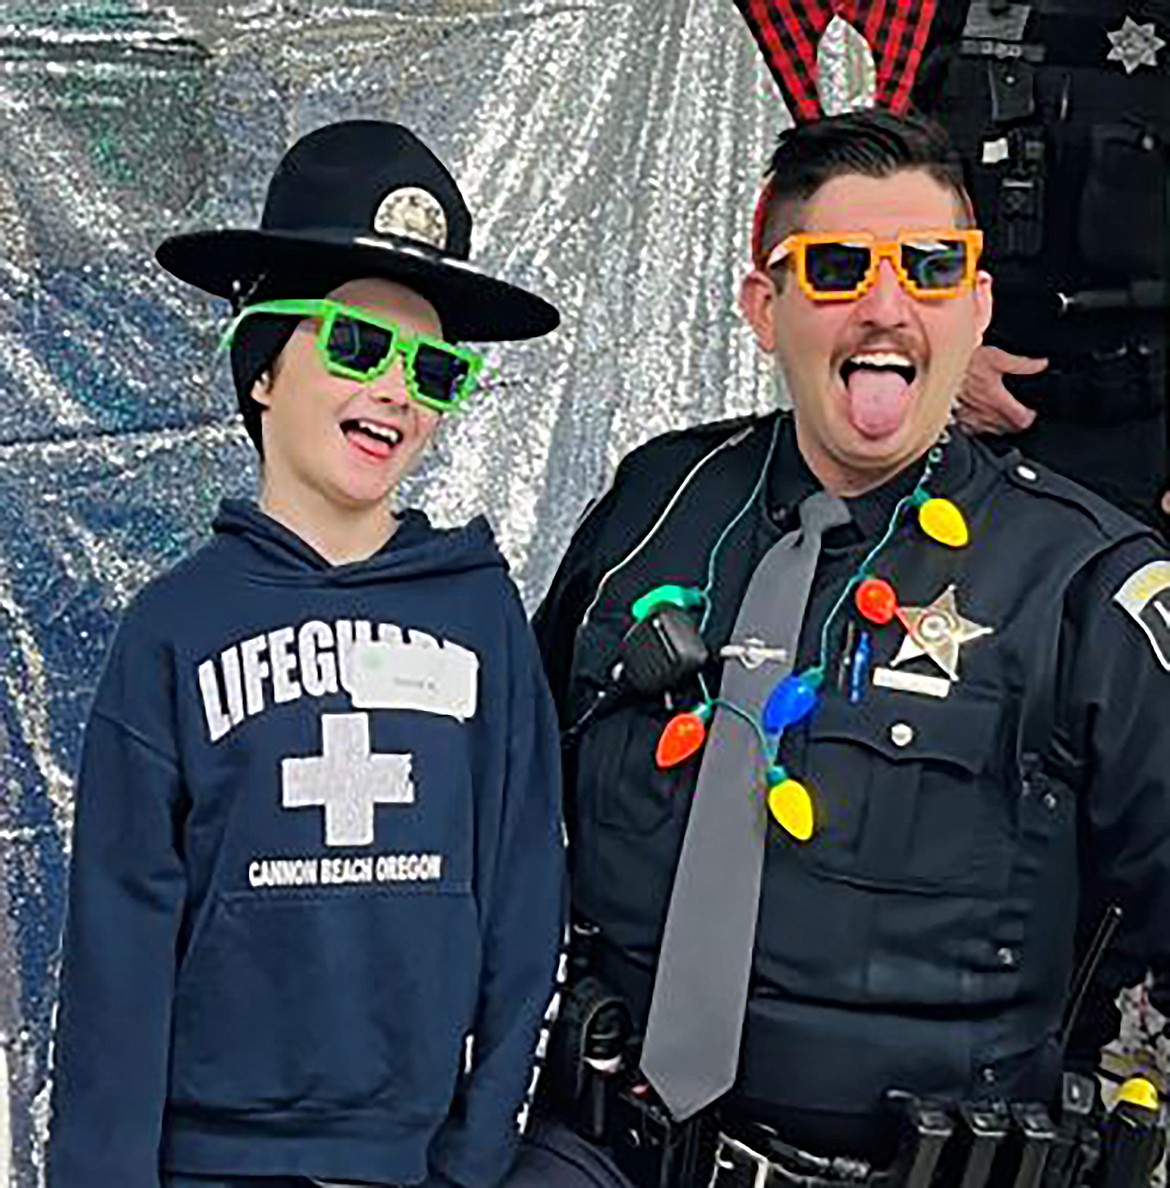 An Idaho State Police trooper and a local youth make faces for the camera at last week's "Shop with a Cop" event.